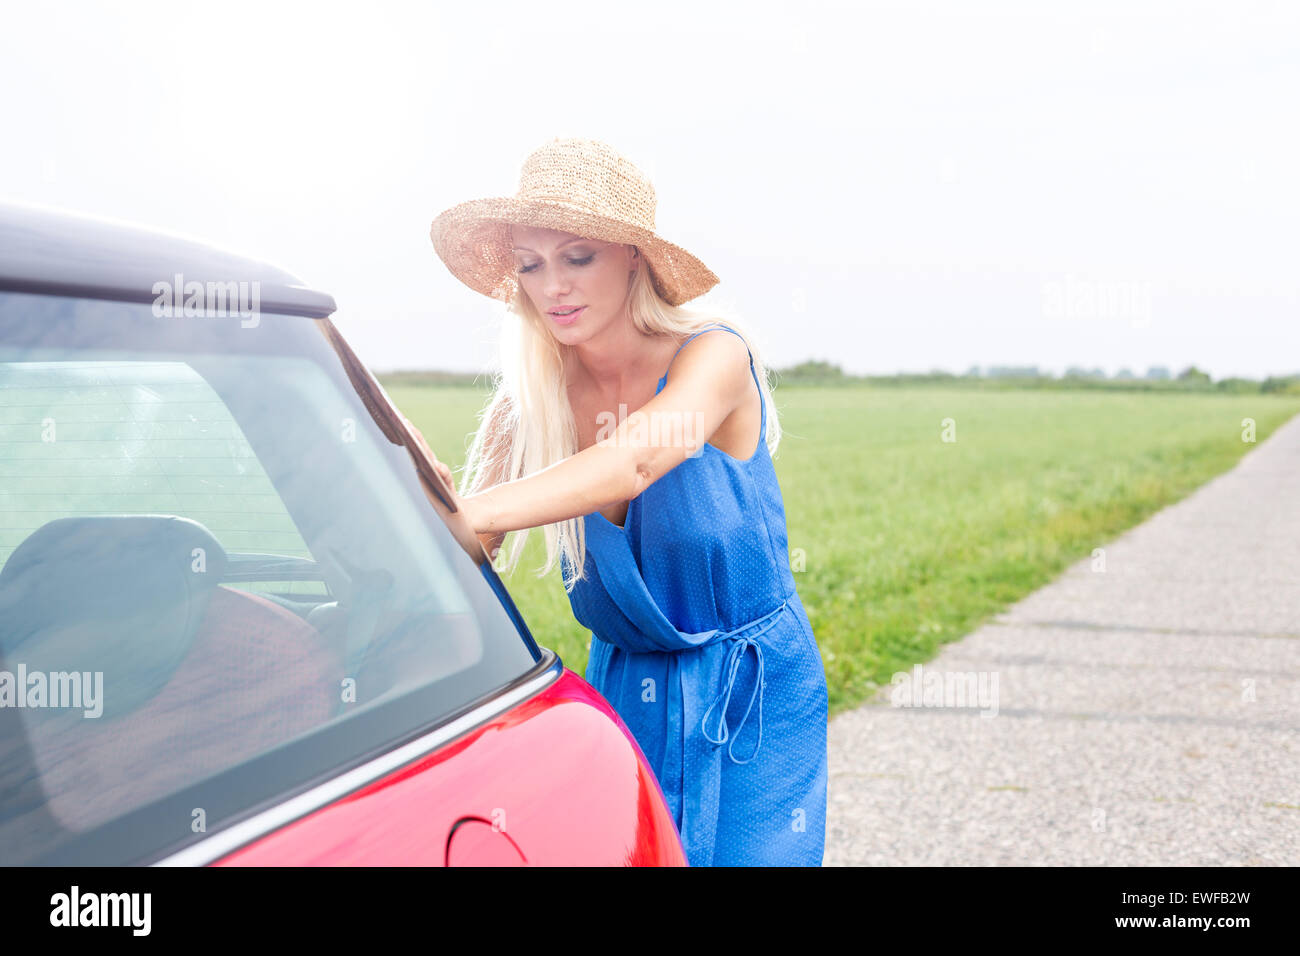 Woman pushing broken down car on country road against clear sky Stock Photo